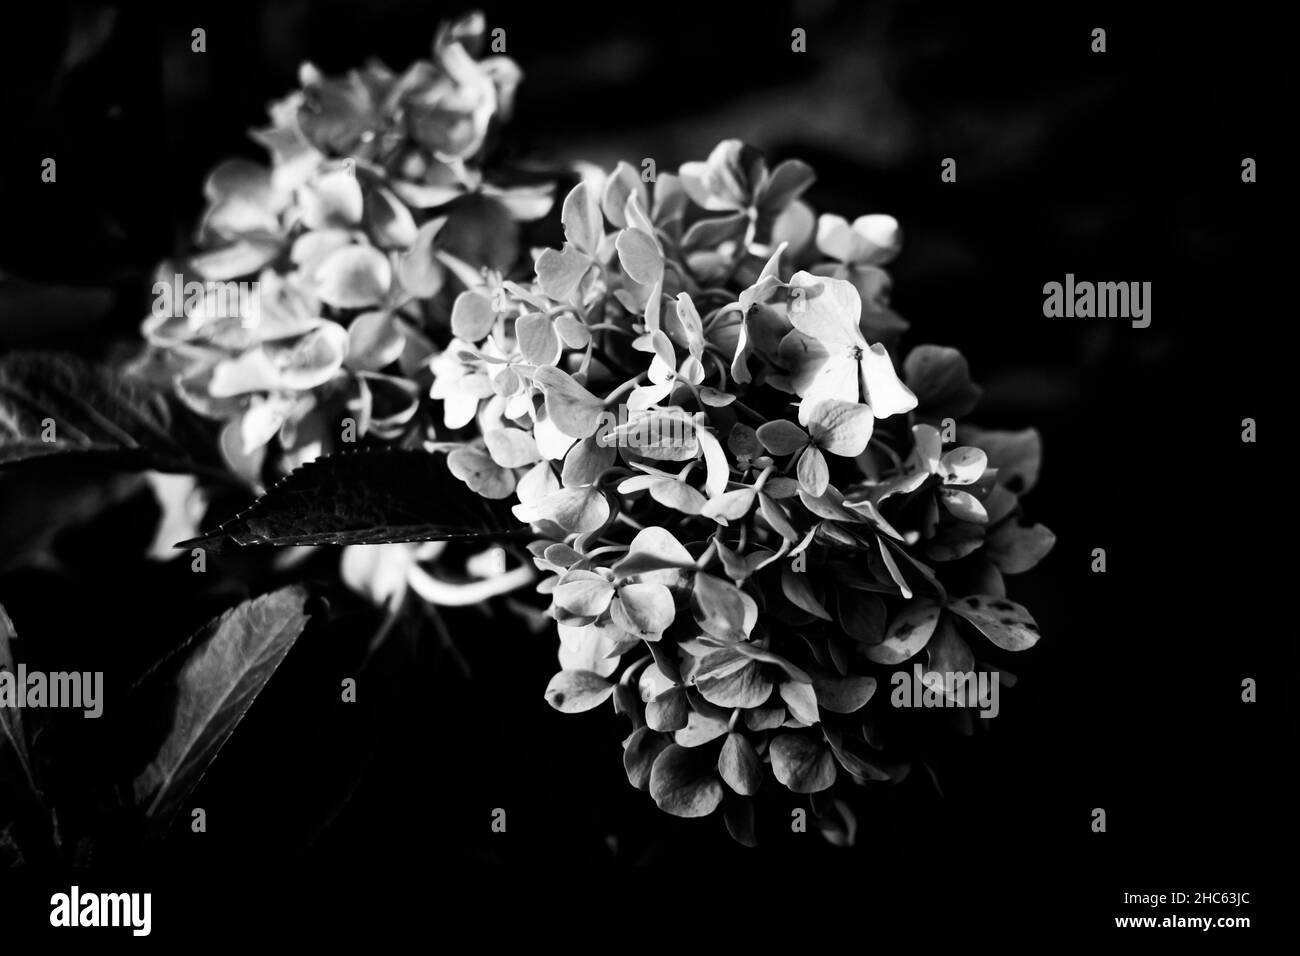 Grayscale shot of a bunch of French hydrangea flowers growing on the shrub Stock Photo